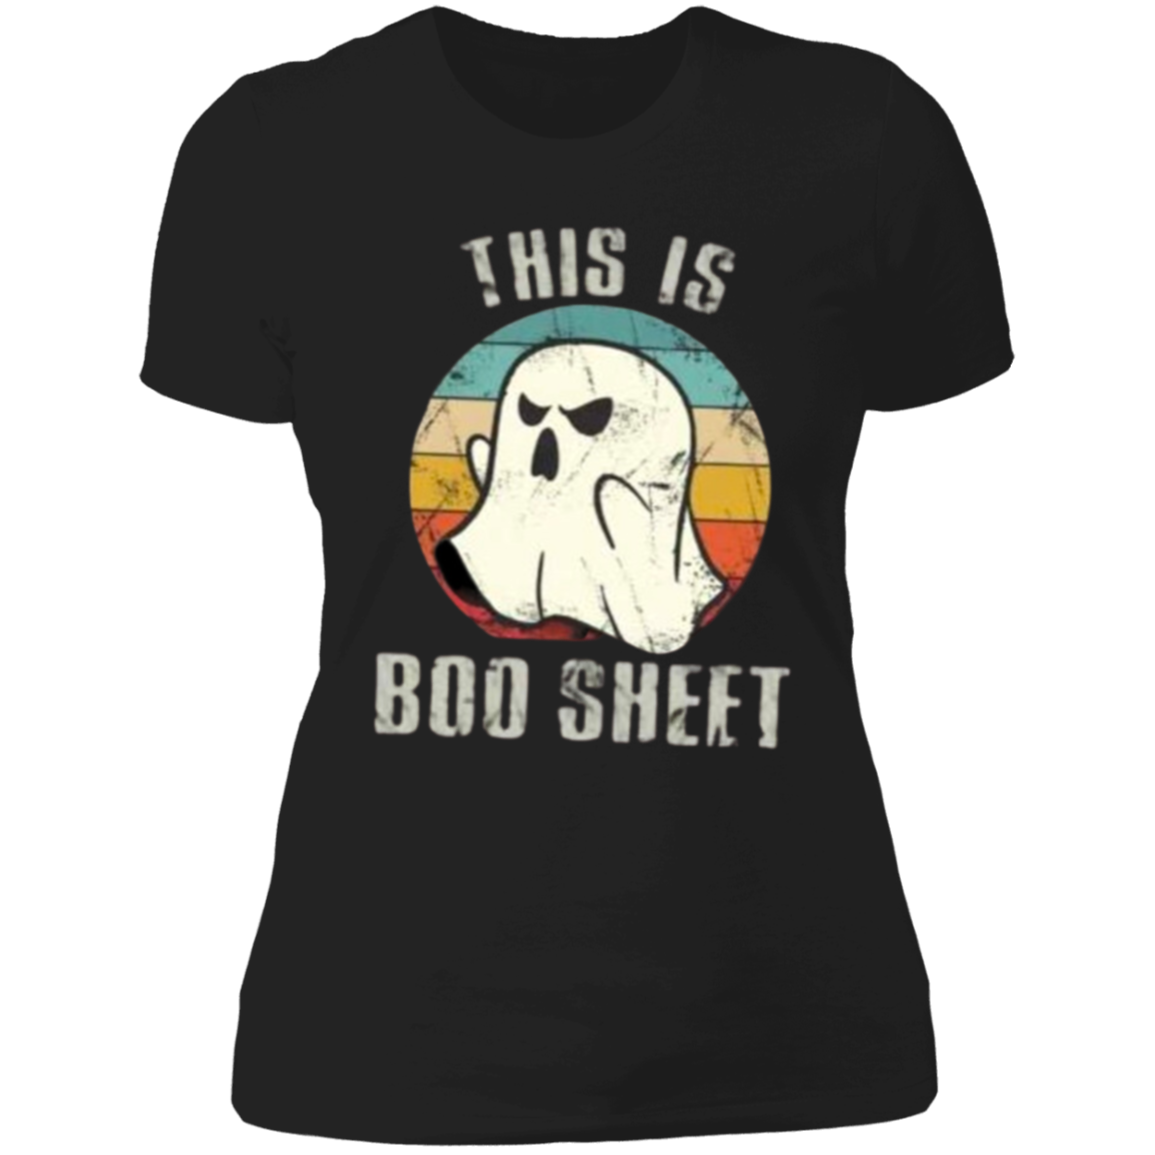 This is Boo Sheet Women's Tee